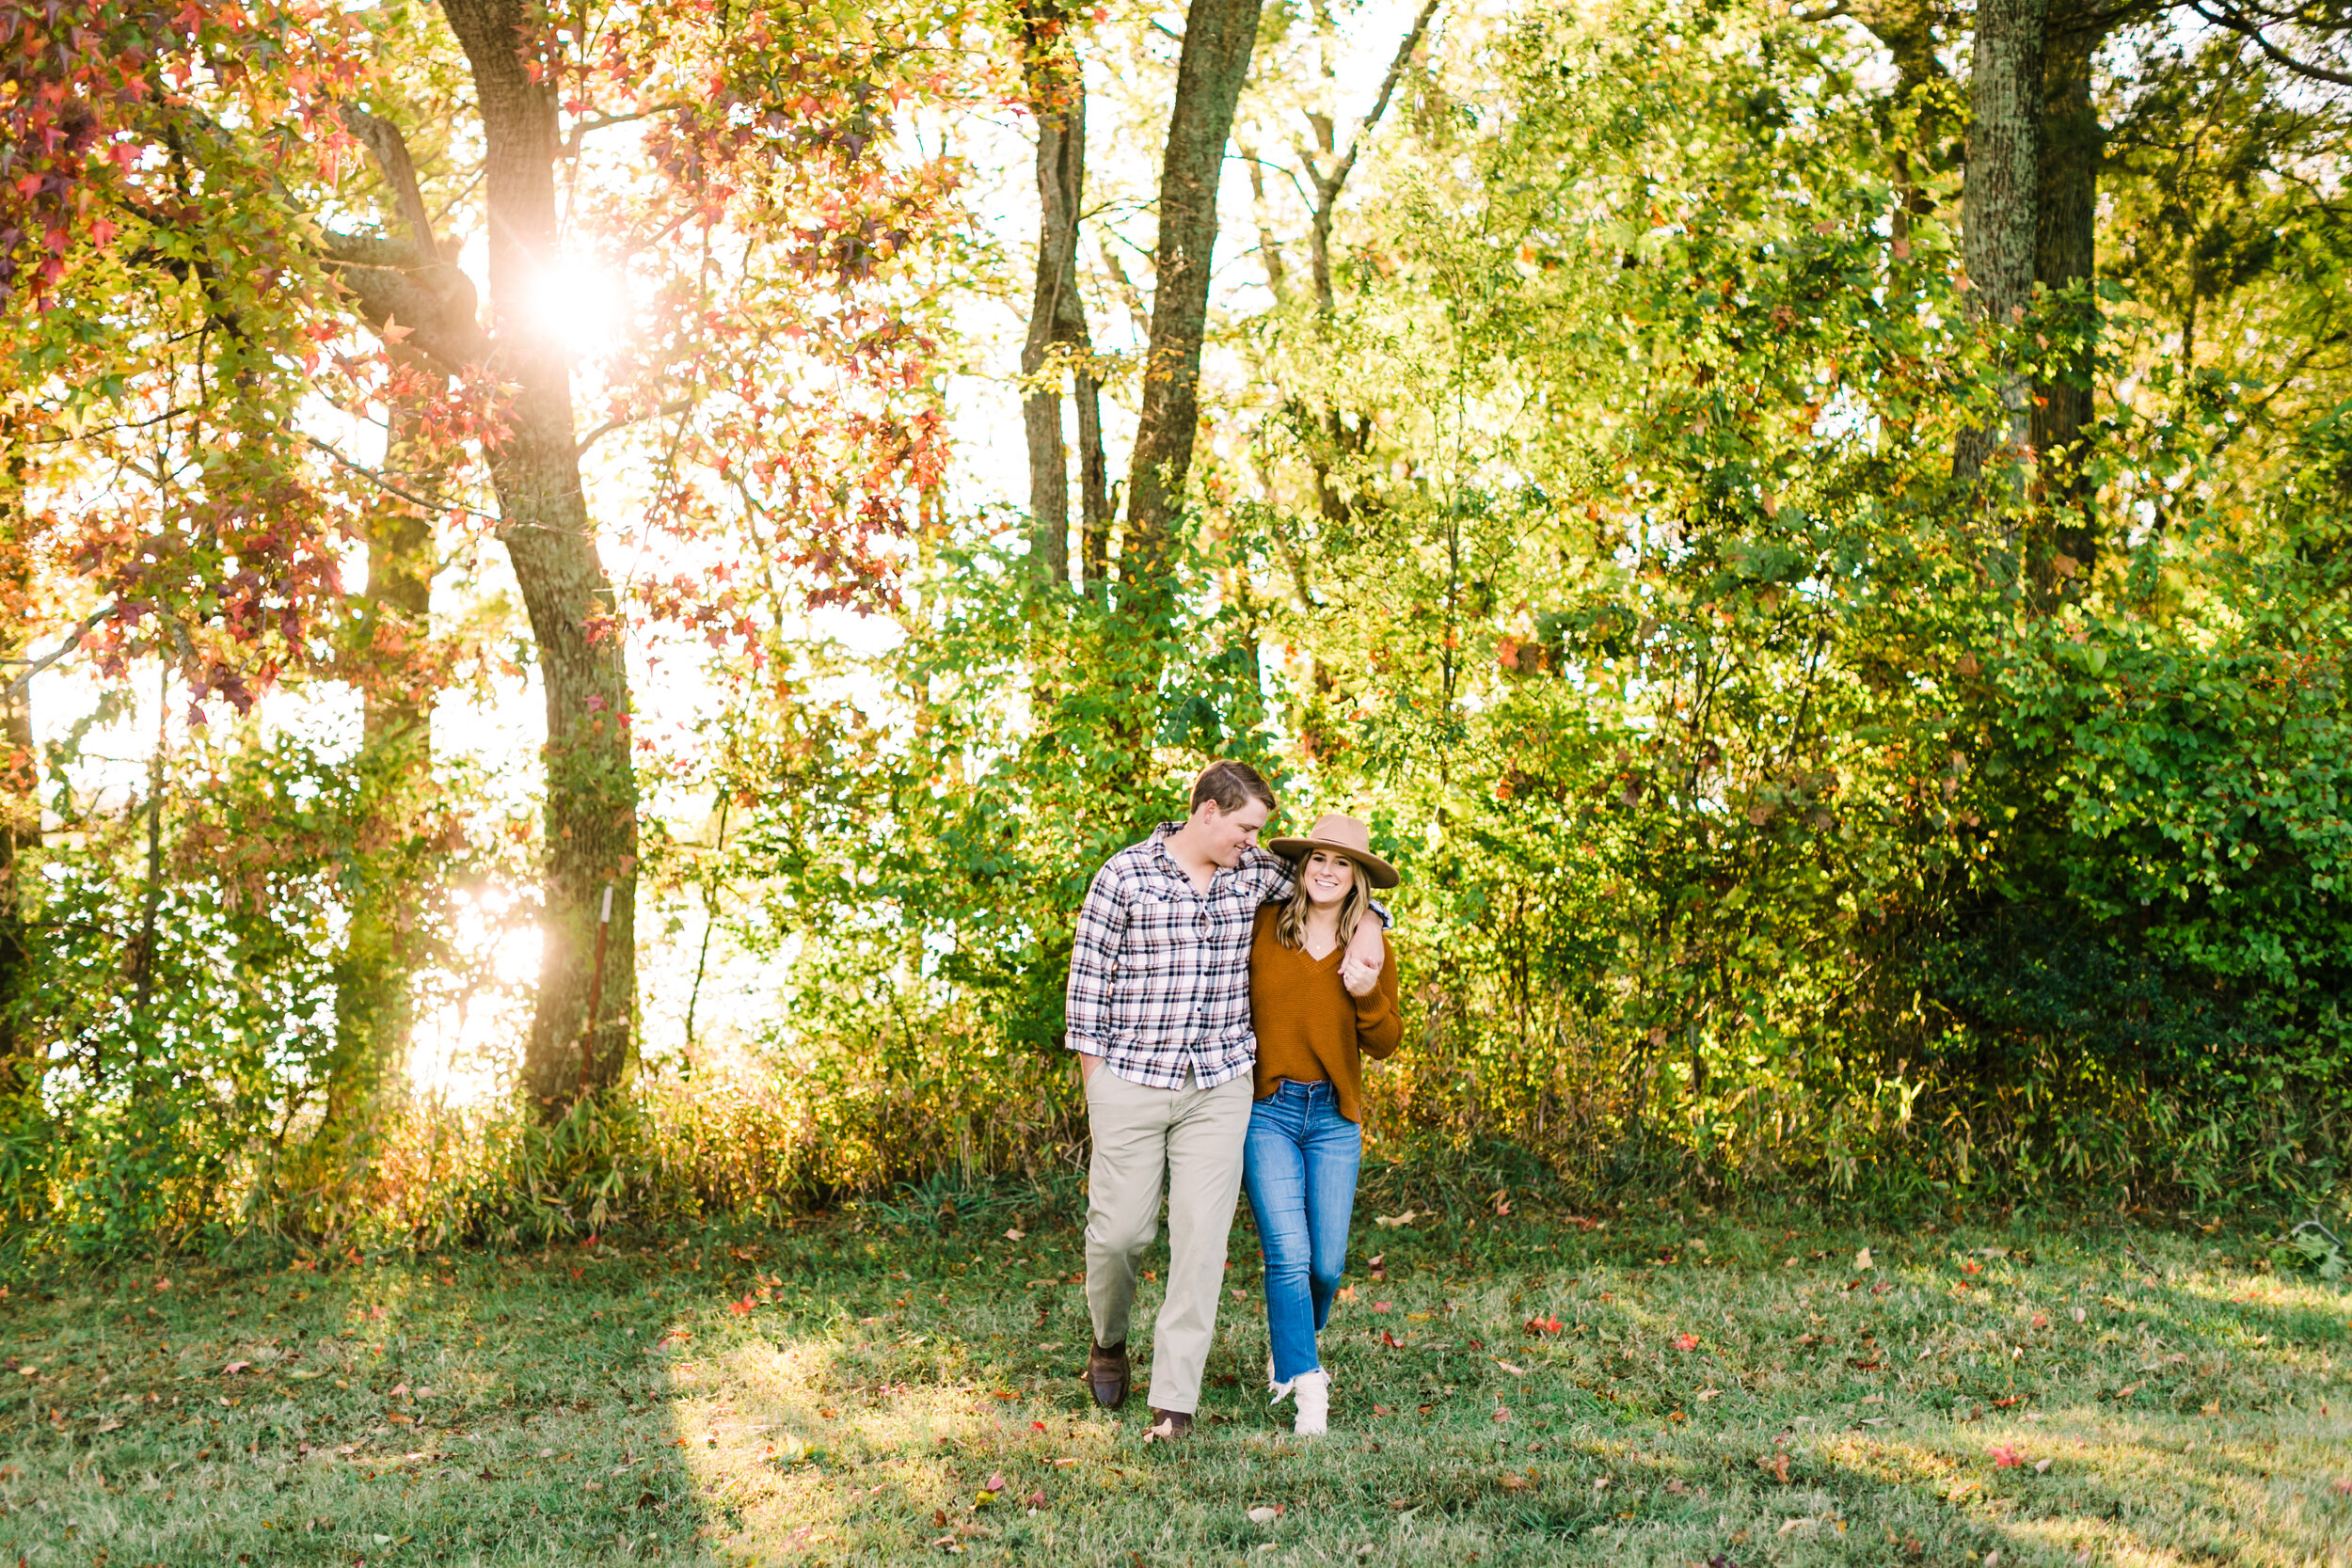 Tennessee+Fall+Engagement+Photos+Puppy (36 of 63).jpg